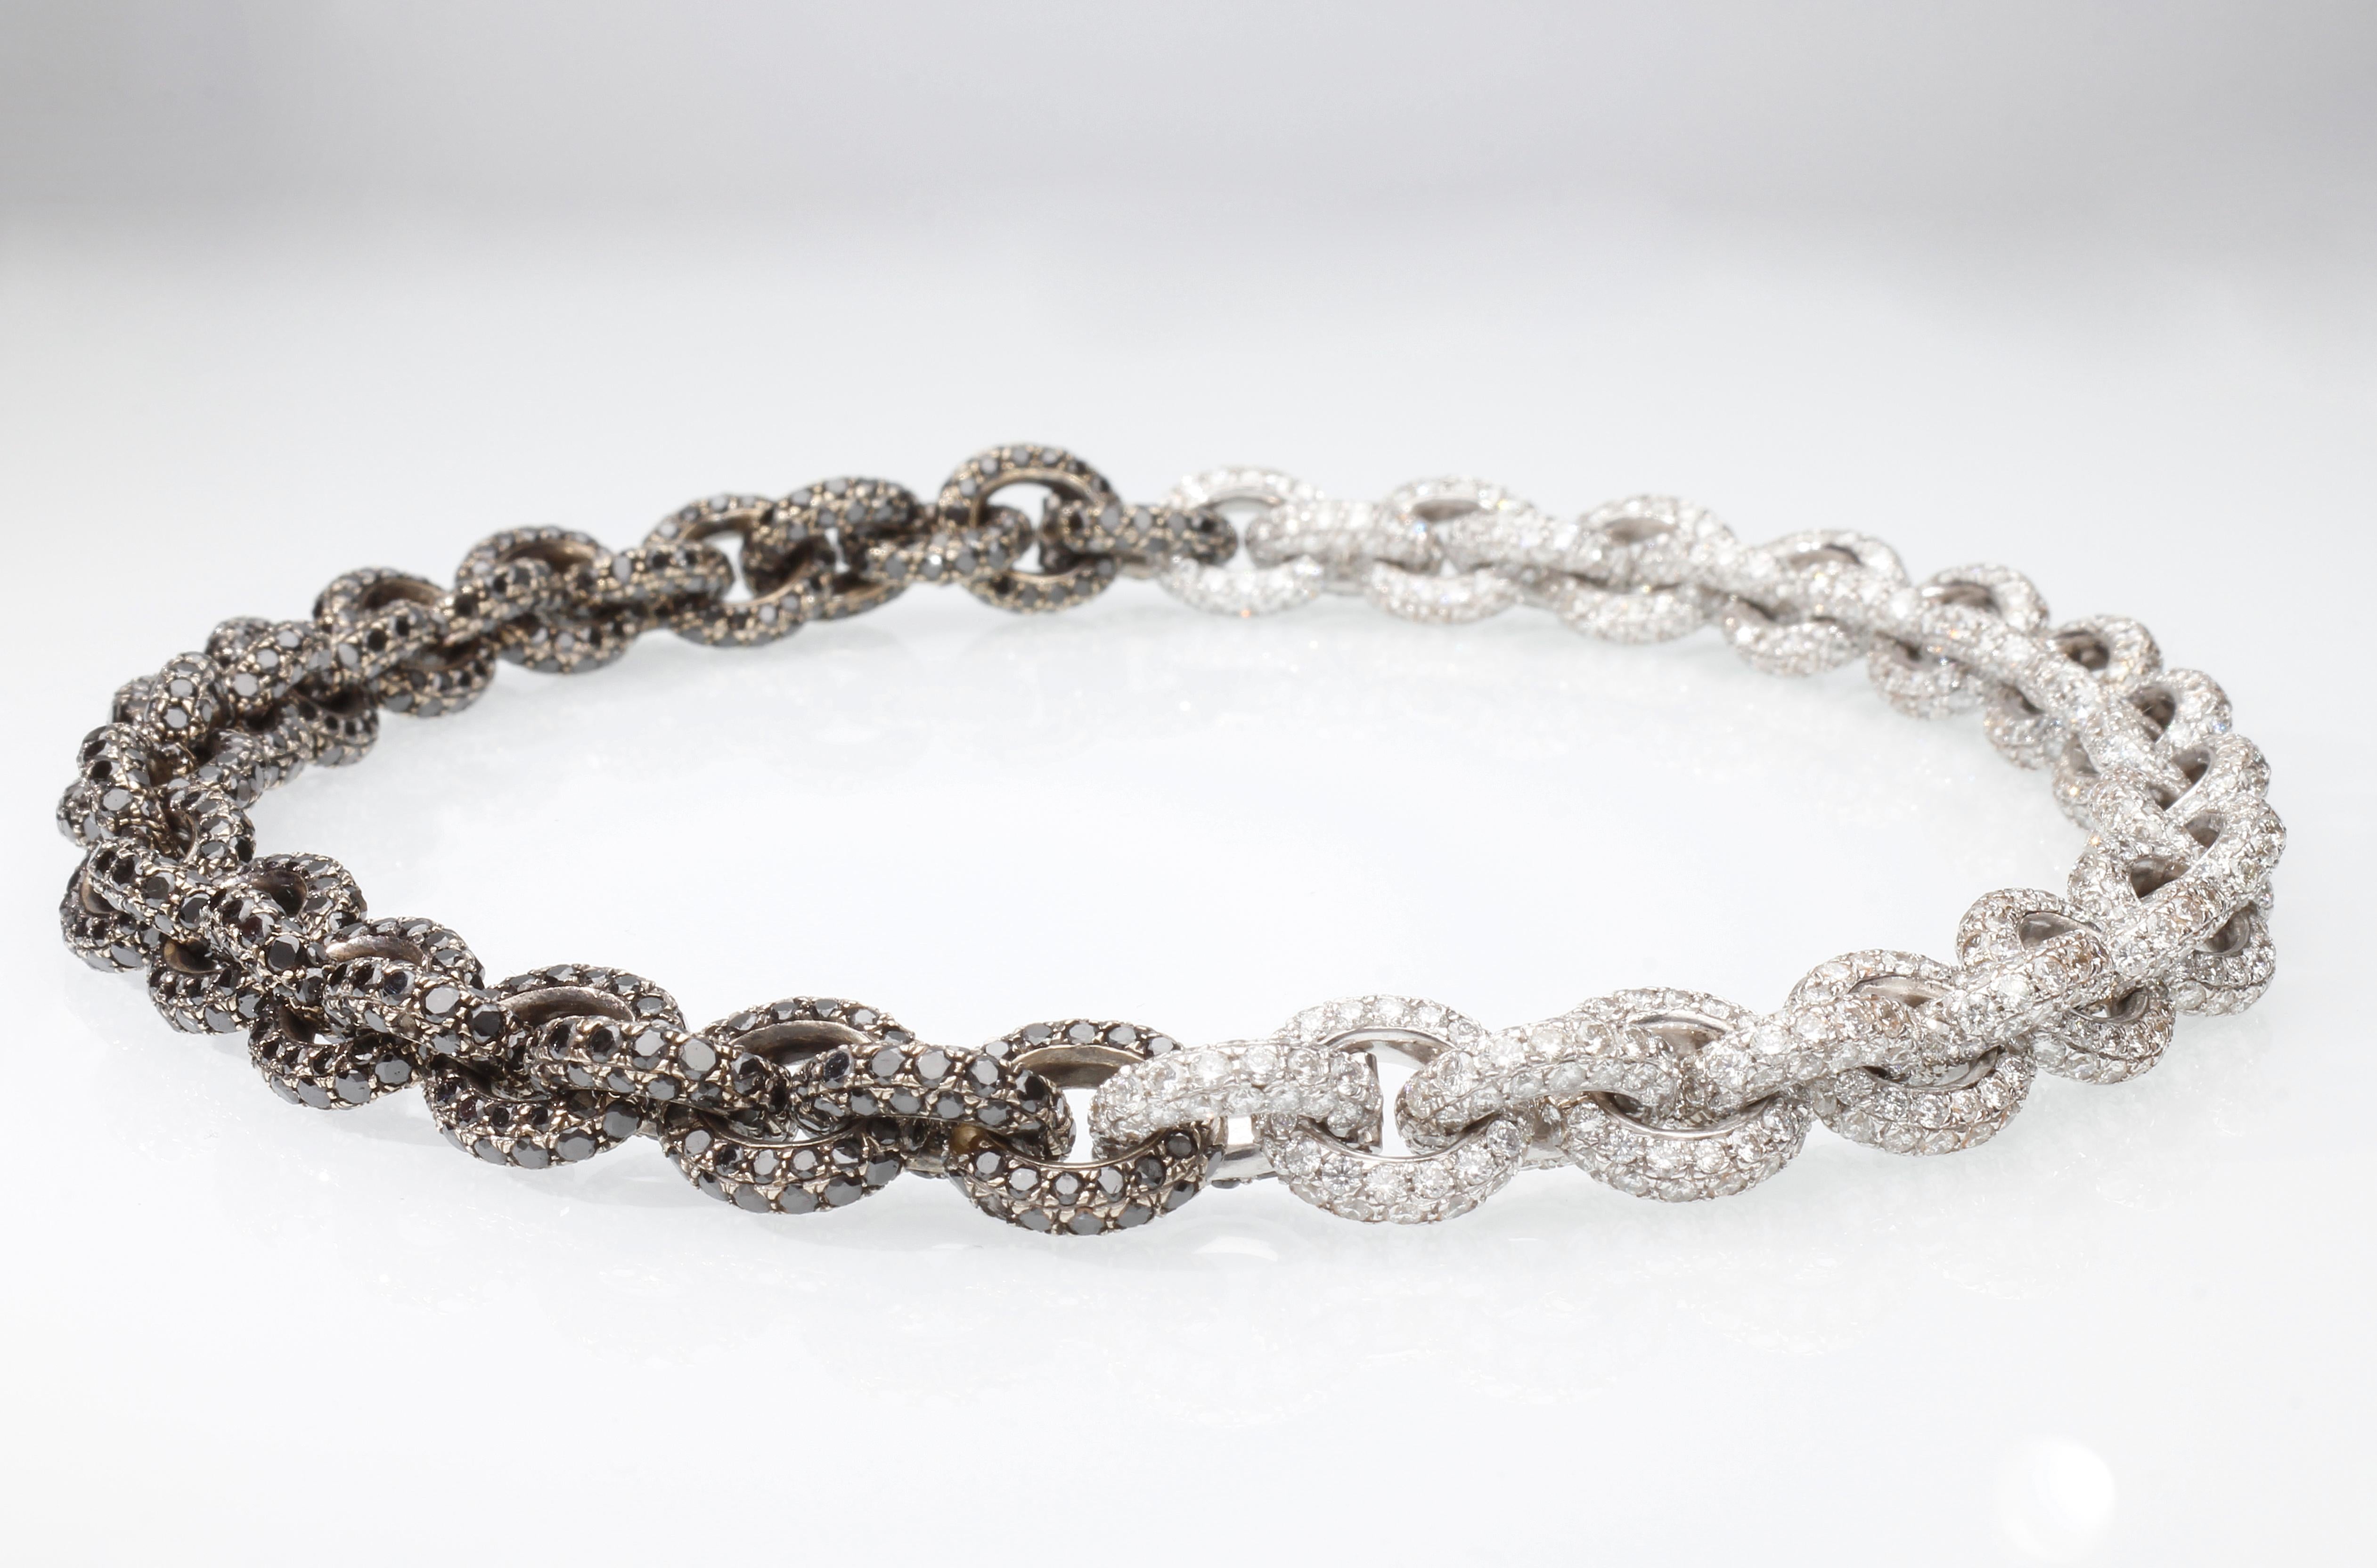 Chain Necklace/Bracelet with 64.26 Ct of White and Black Diamonds. Handmade. For Sale 7